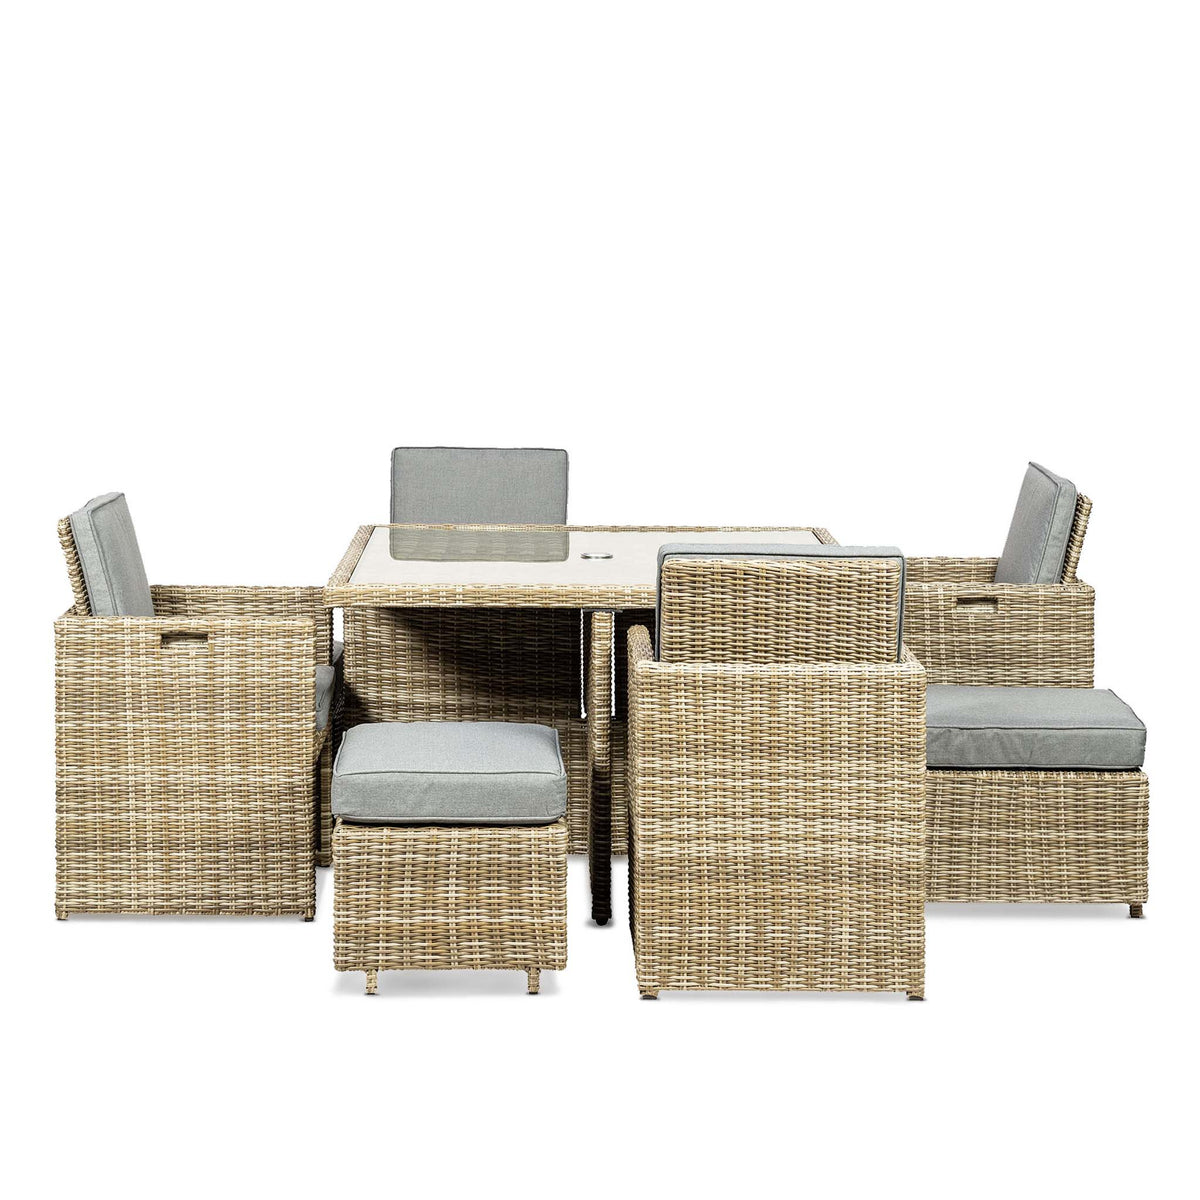 Wentworth 8 Seat Deluxe Rattan Cube Garden Dining Set - Side view